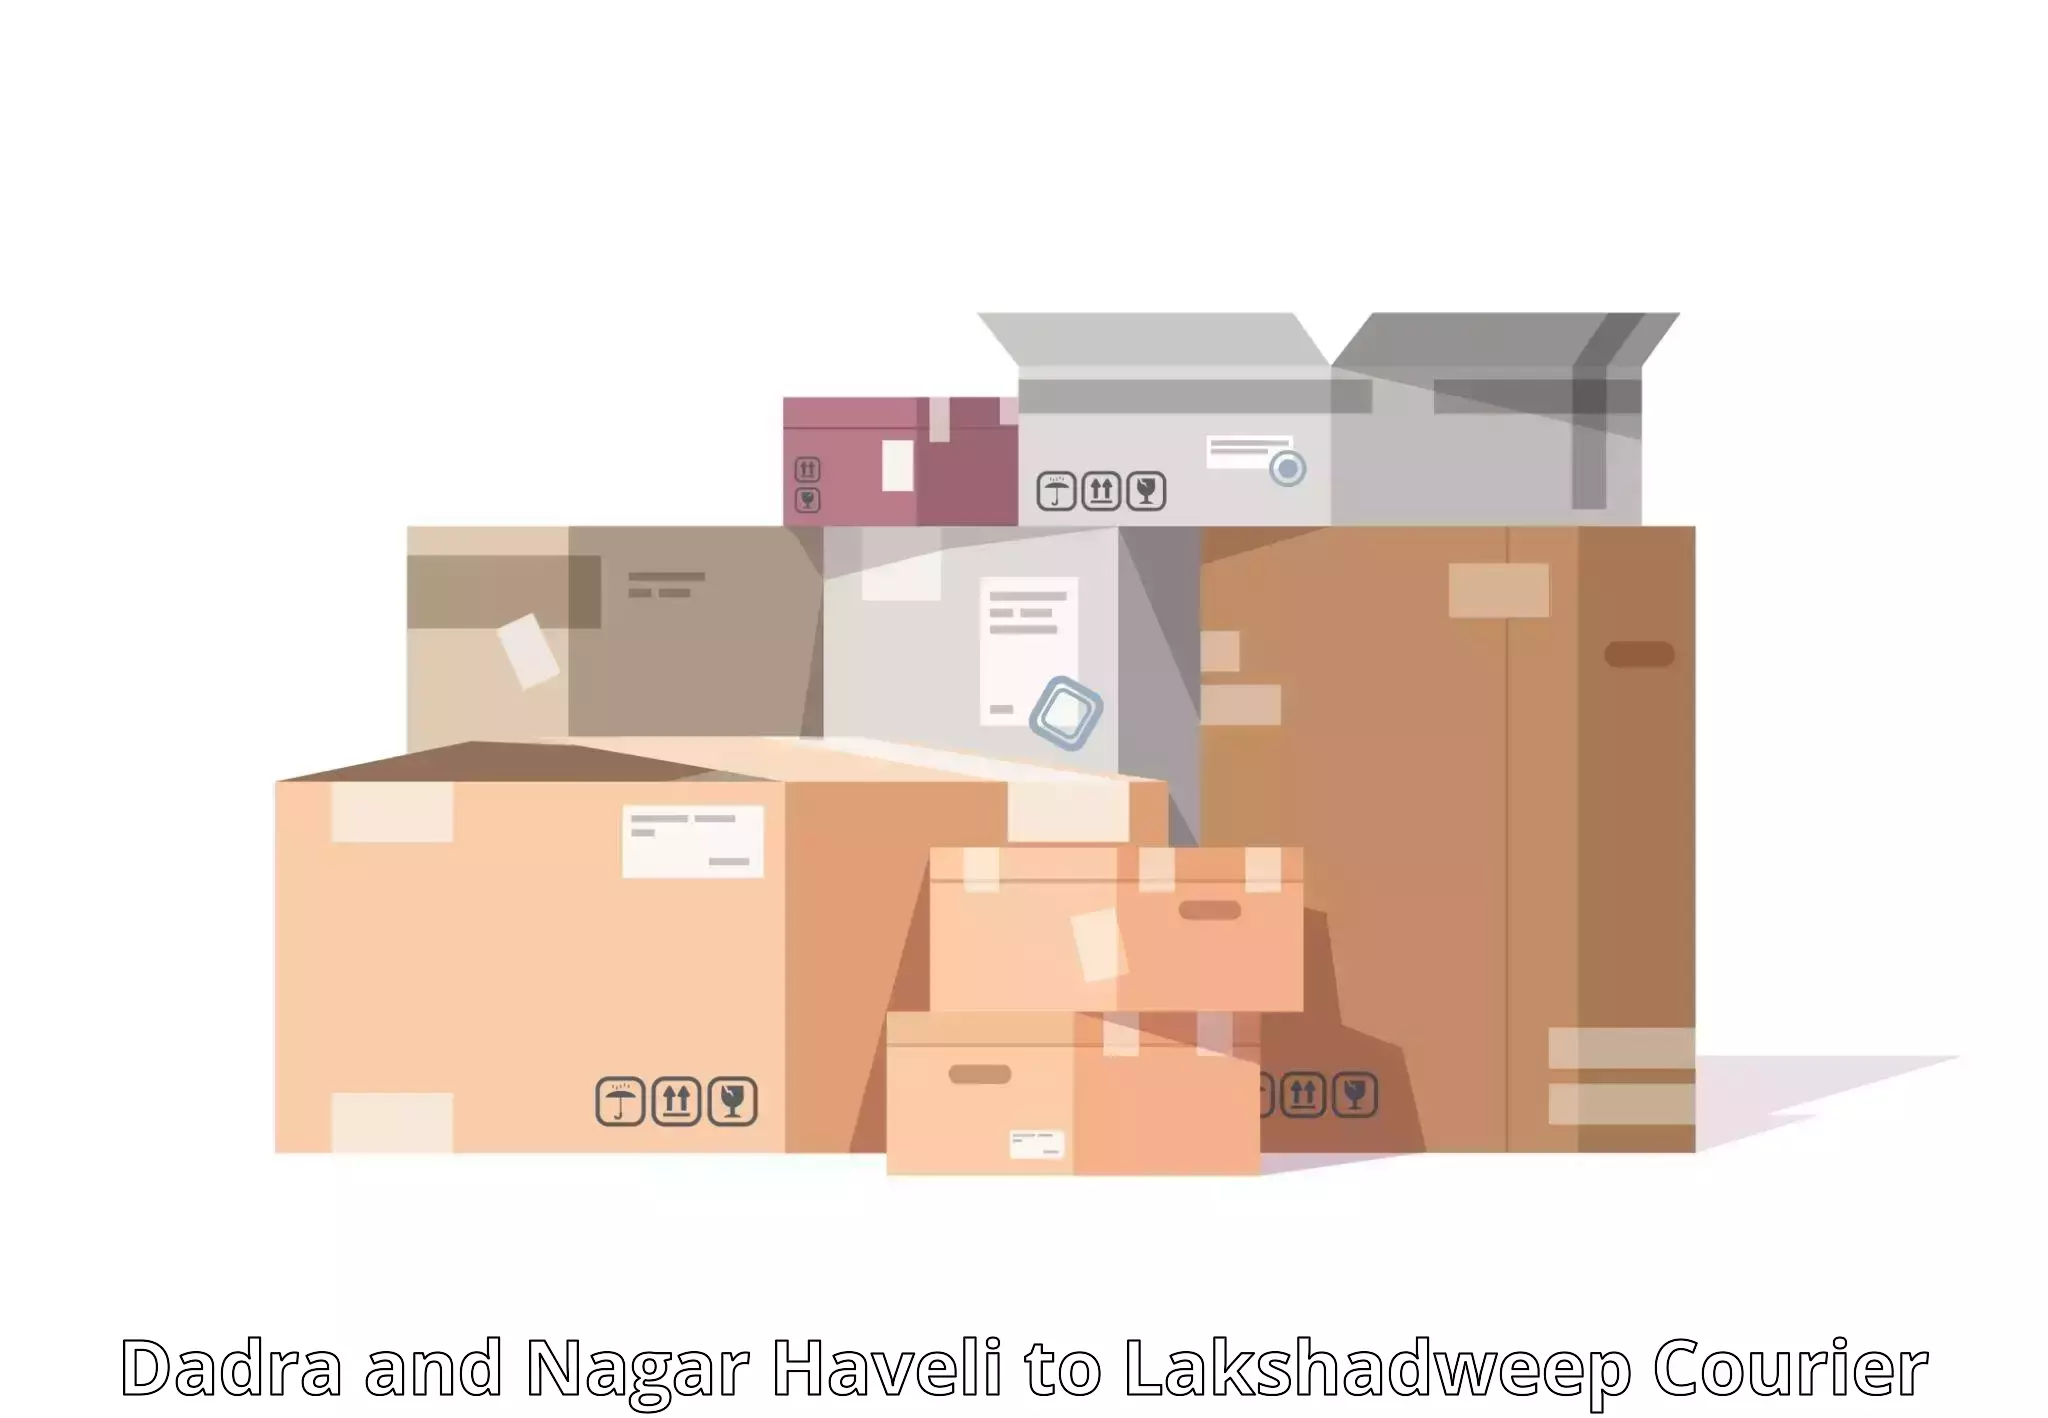 Courier service comparison in Dadra and Nagar Haveli to Lakshadweep